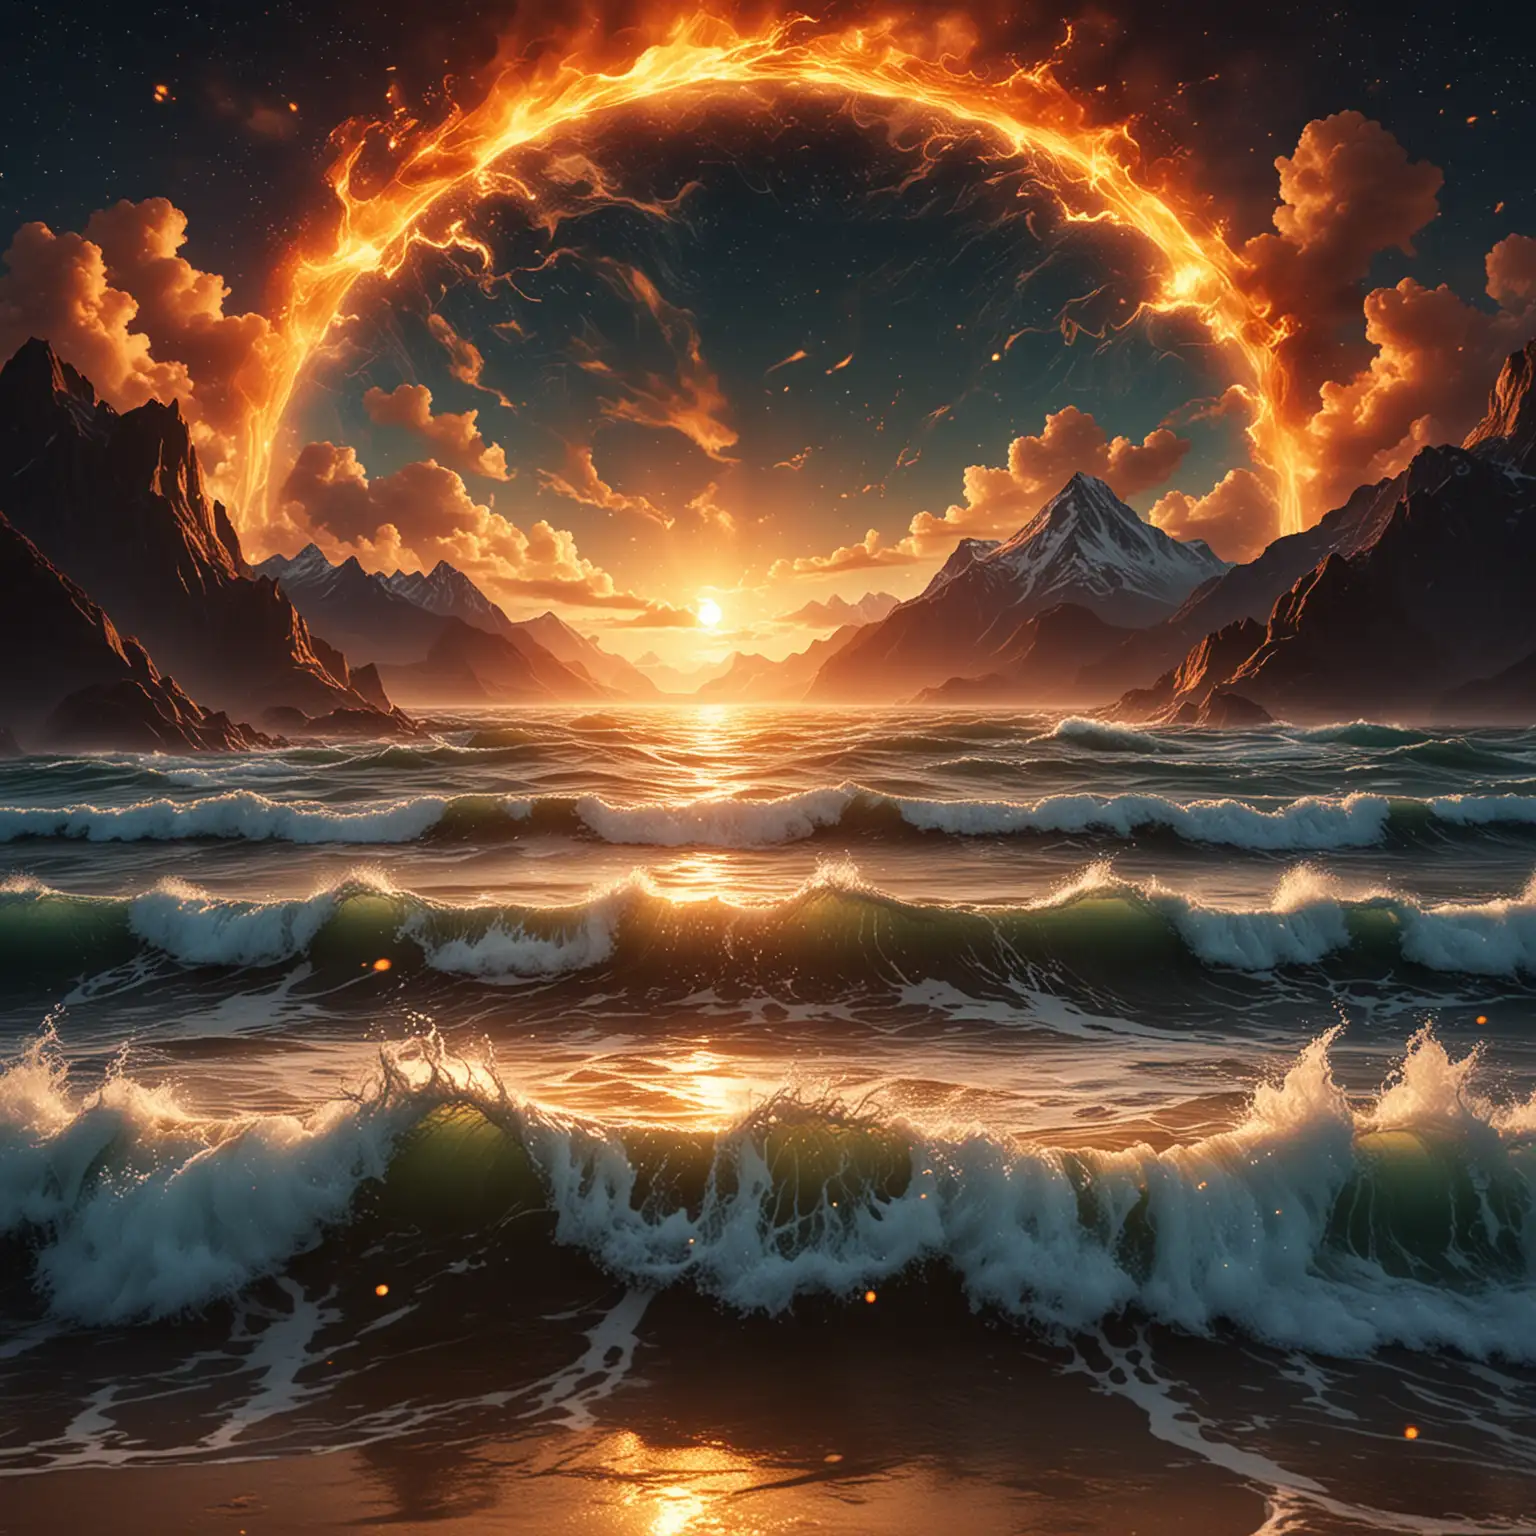 create an image that depicts an ocean with waves with flames on the water with mountains in the background against a night sky with outerspace and golden light effects